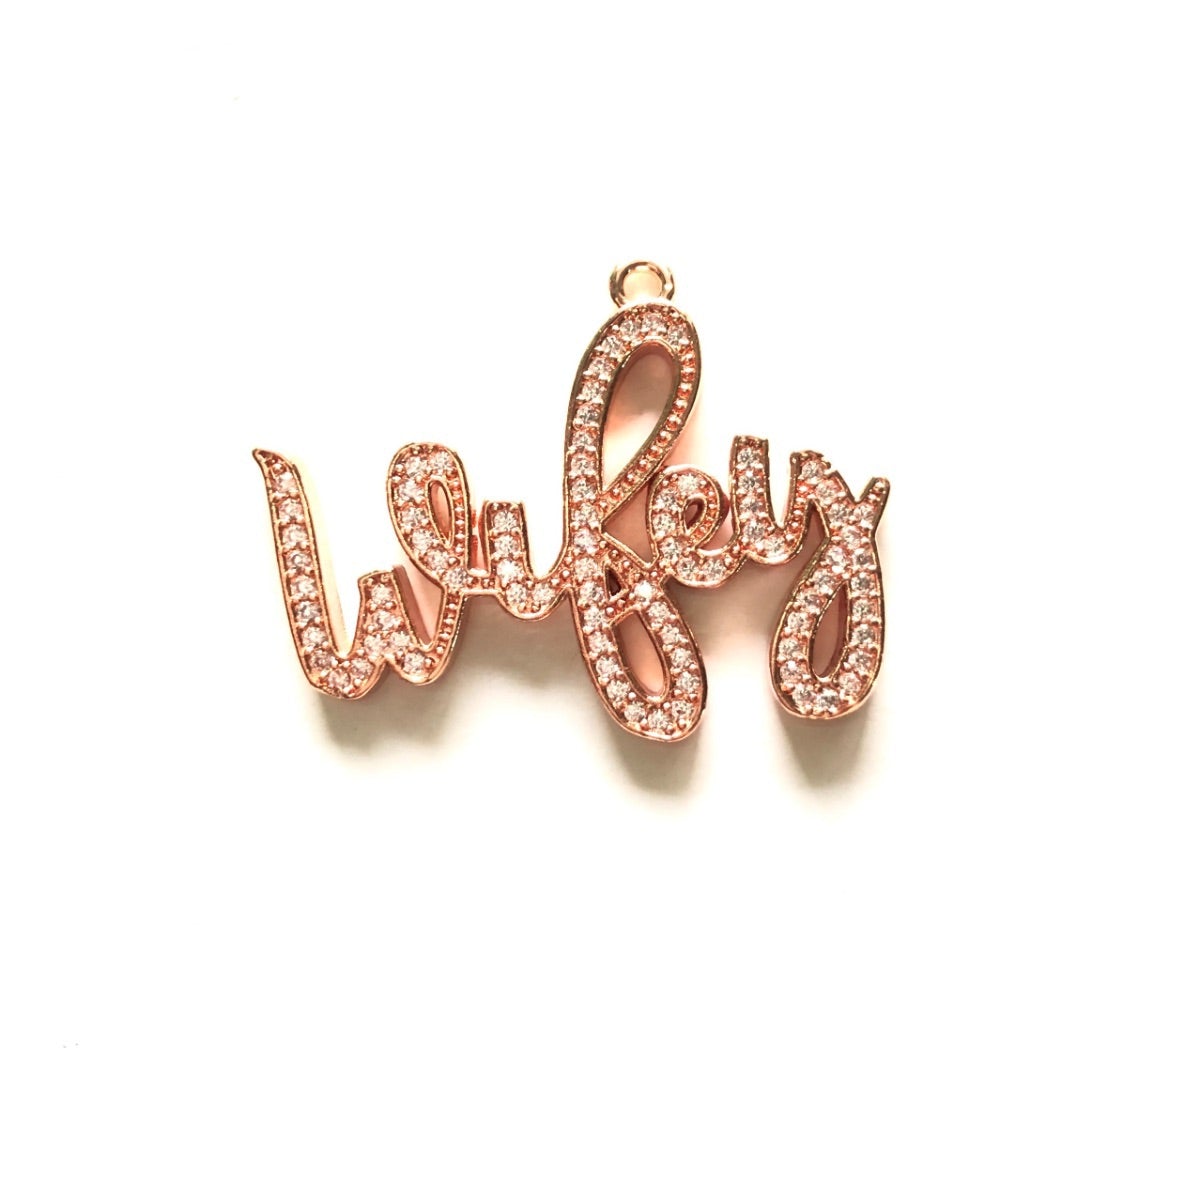 10pcs/lot 30*23.5mm CZ Paved Wifey Word Charm Pendants Rose Gold CZ Paved Charms Words & Quotes Charms Beads Beyond